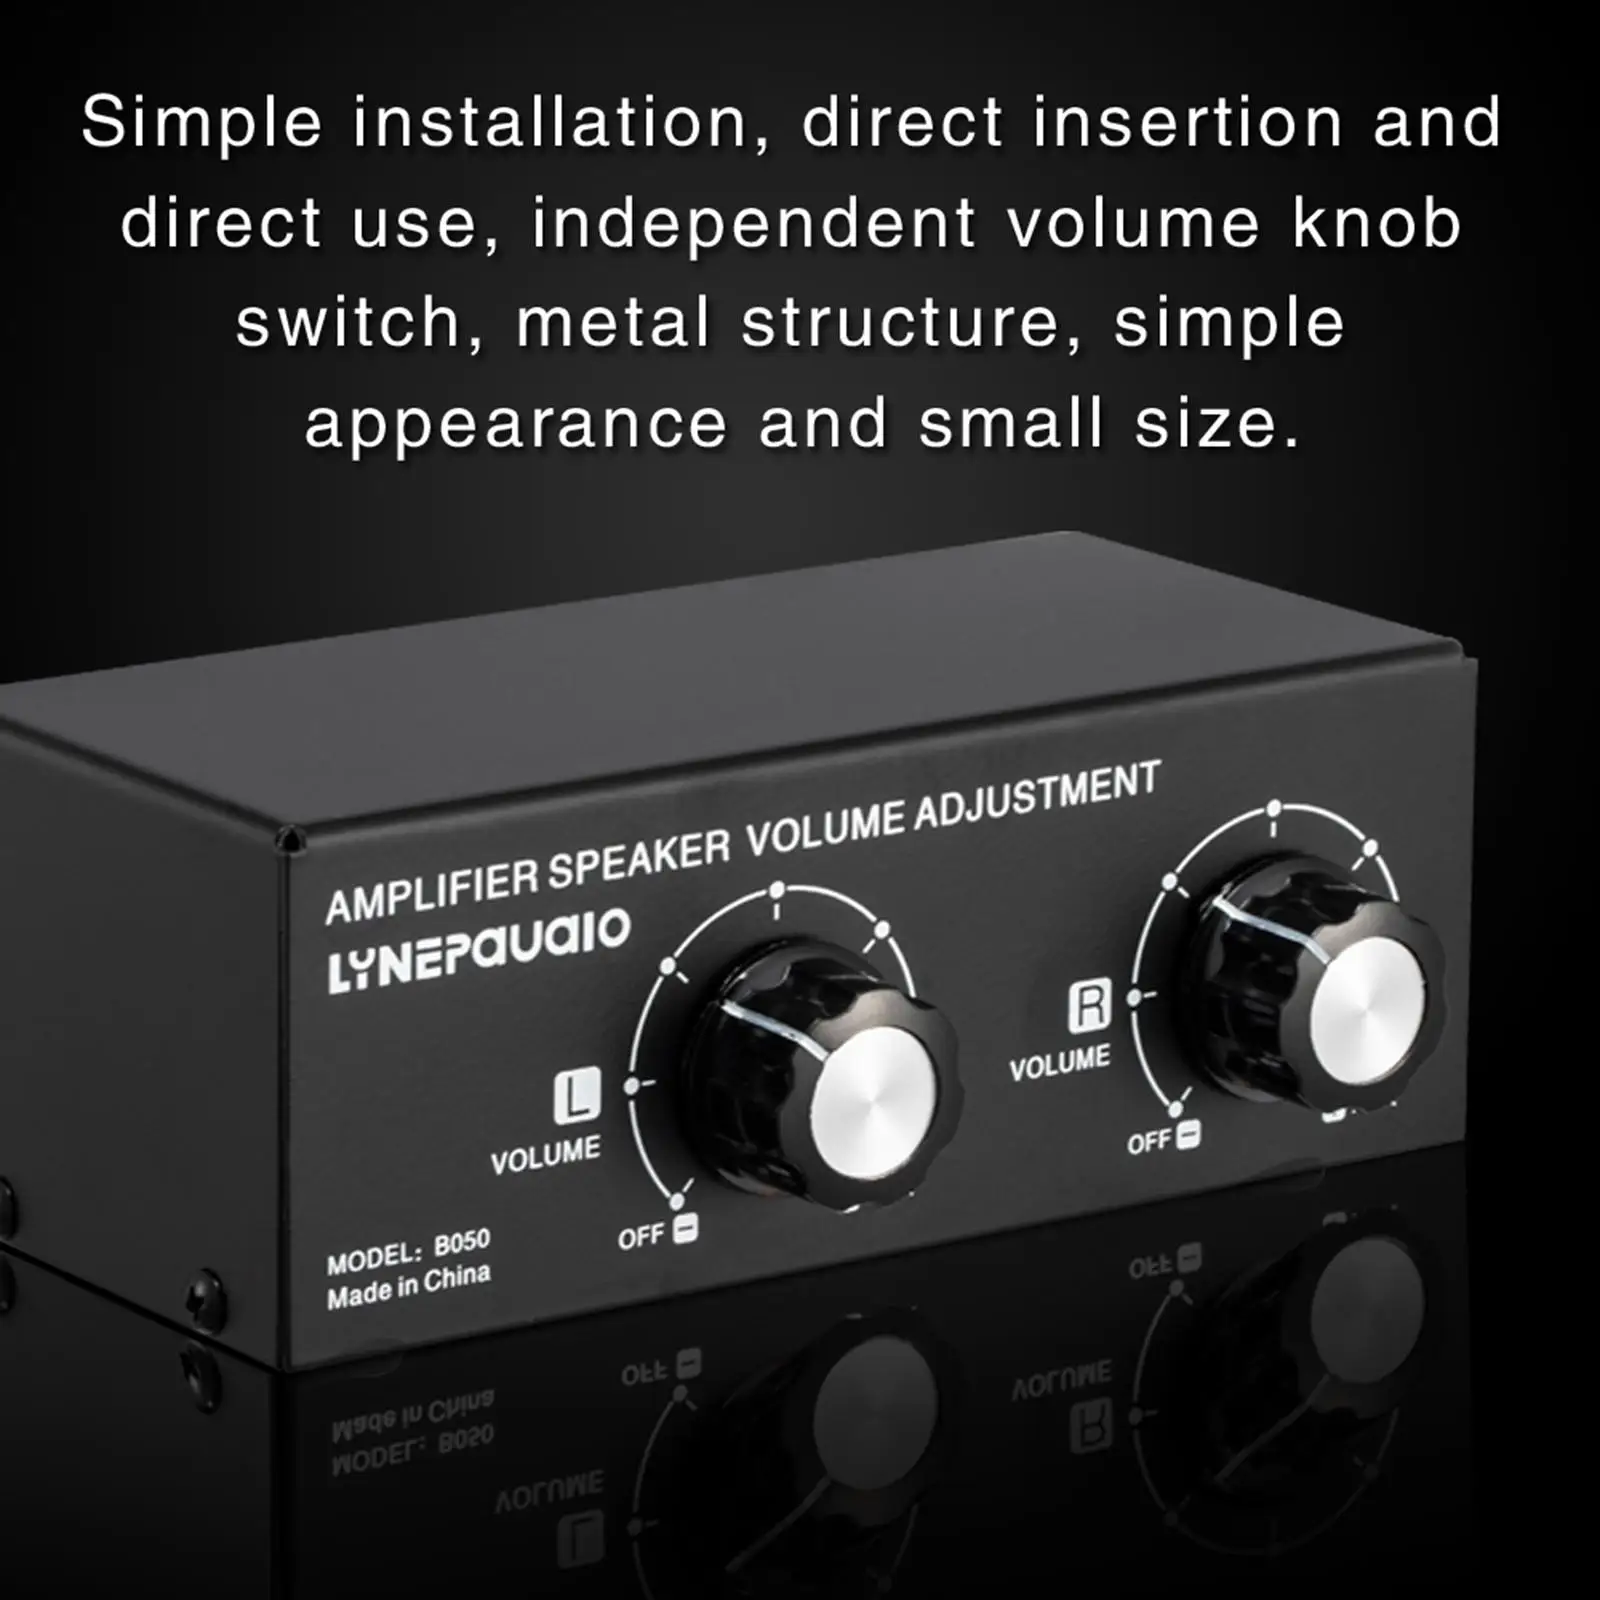 Speaker Volume Selector  Right Channels Up to 150 Channel Distribute Speakers for Film Home Theater Audio